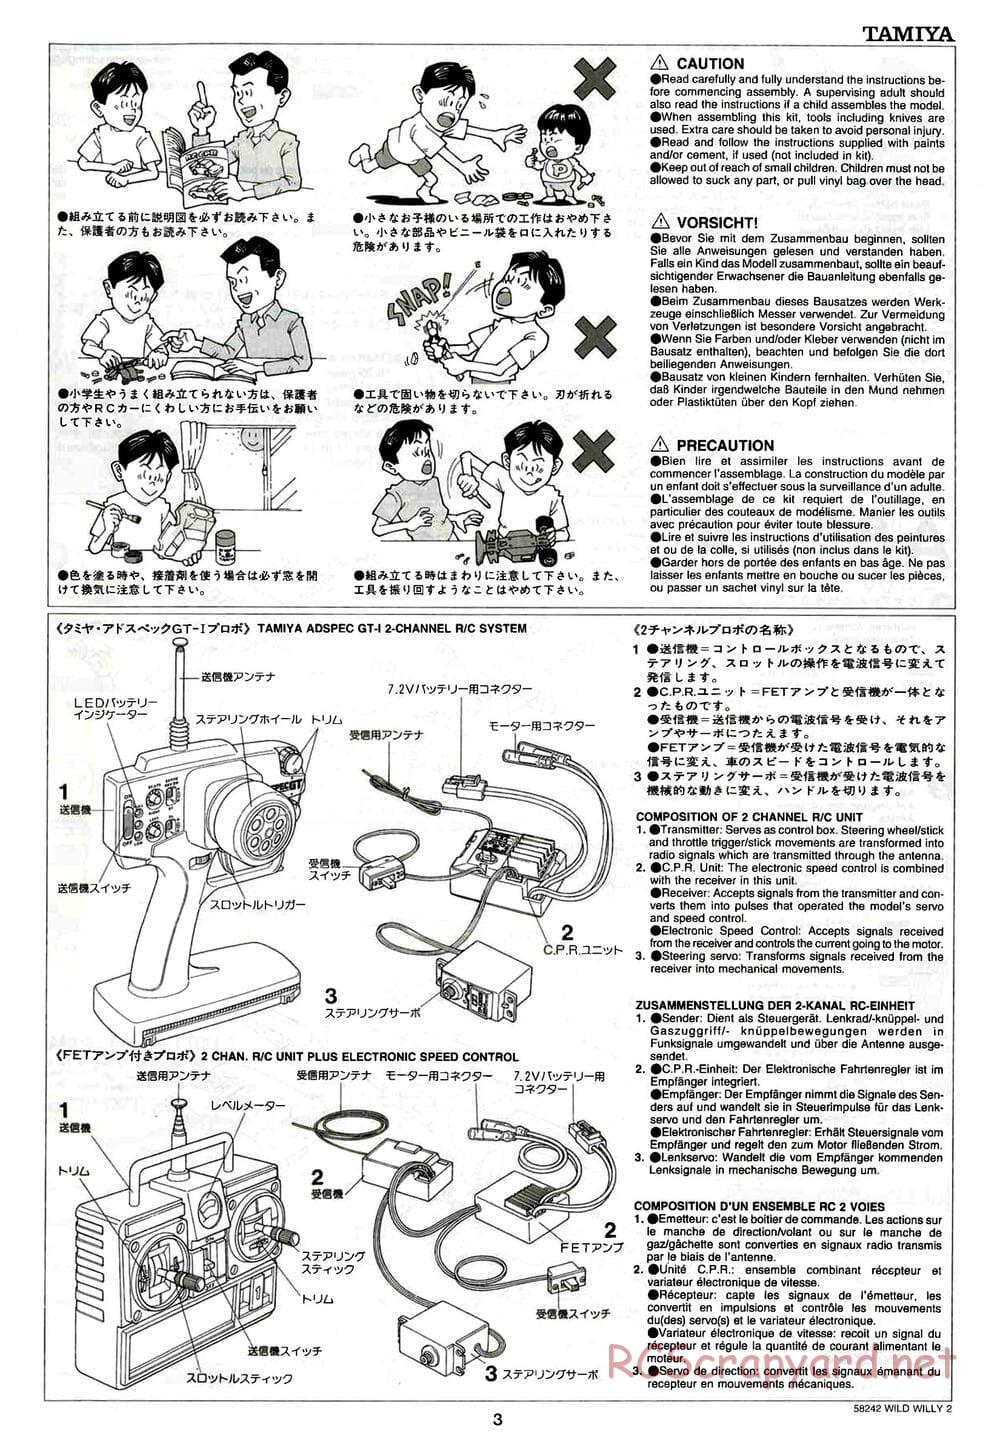 Tamiya - Wild Willy 2 - WR-02 Chassis - Manual - Page 3